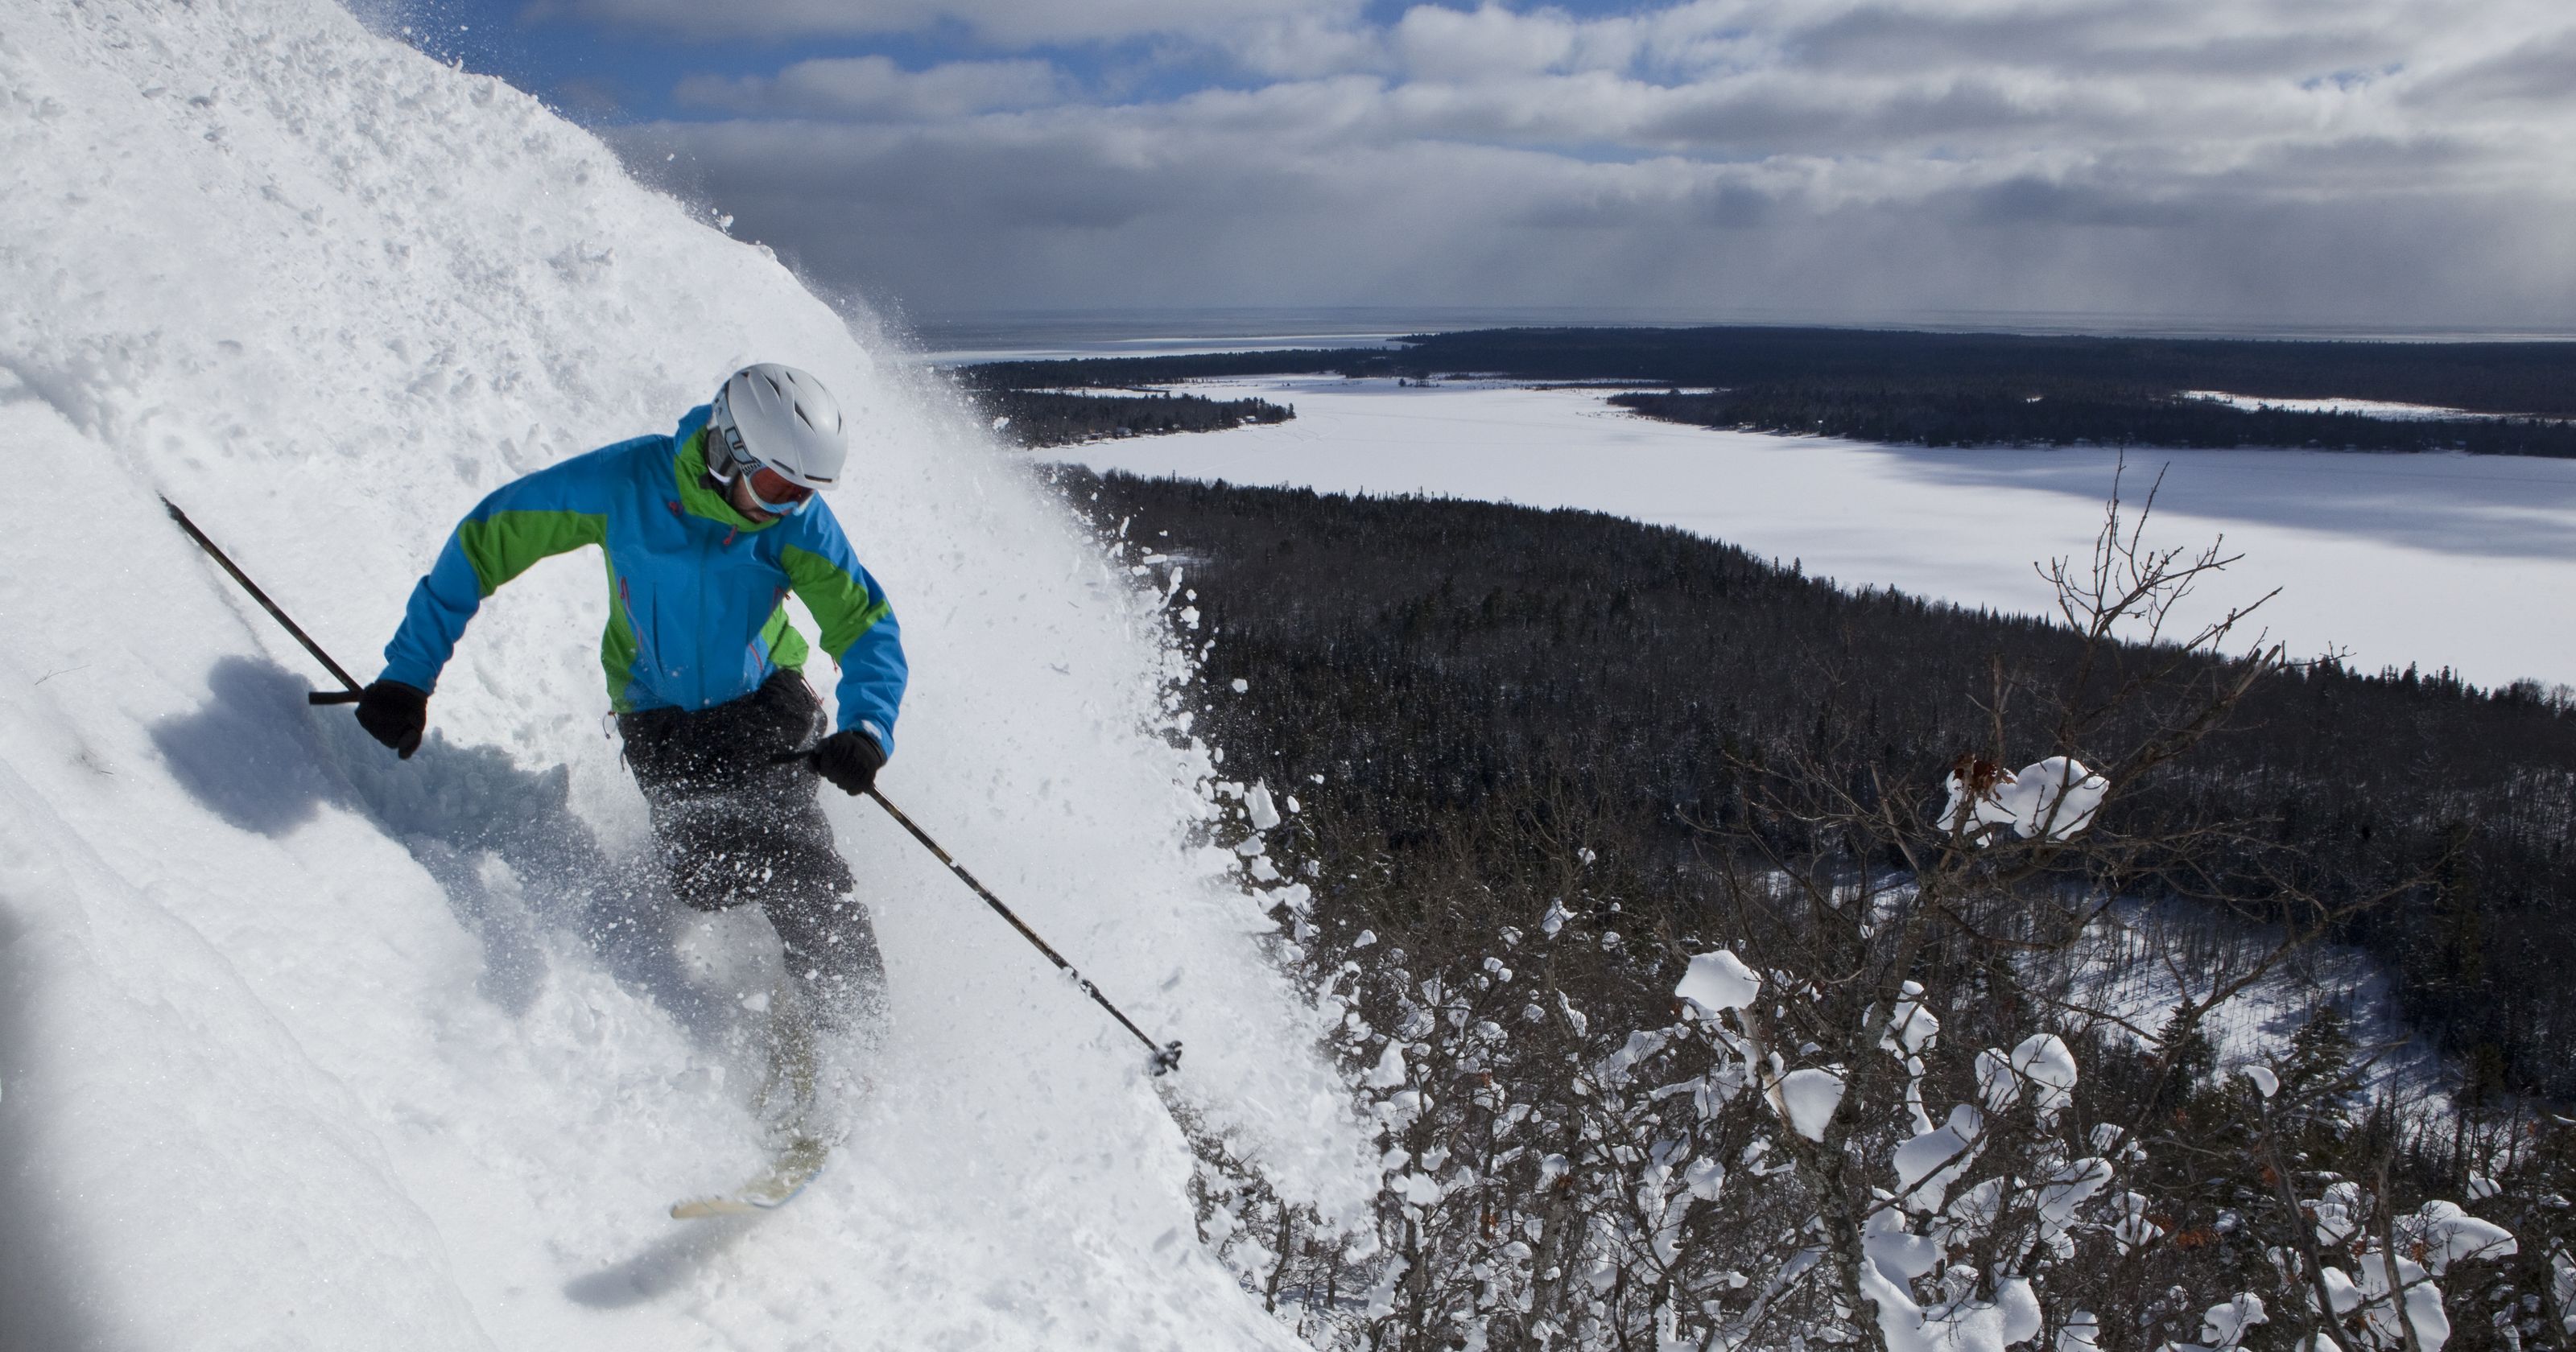 Check out 10 of the top Michigan downhill ski resorts